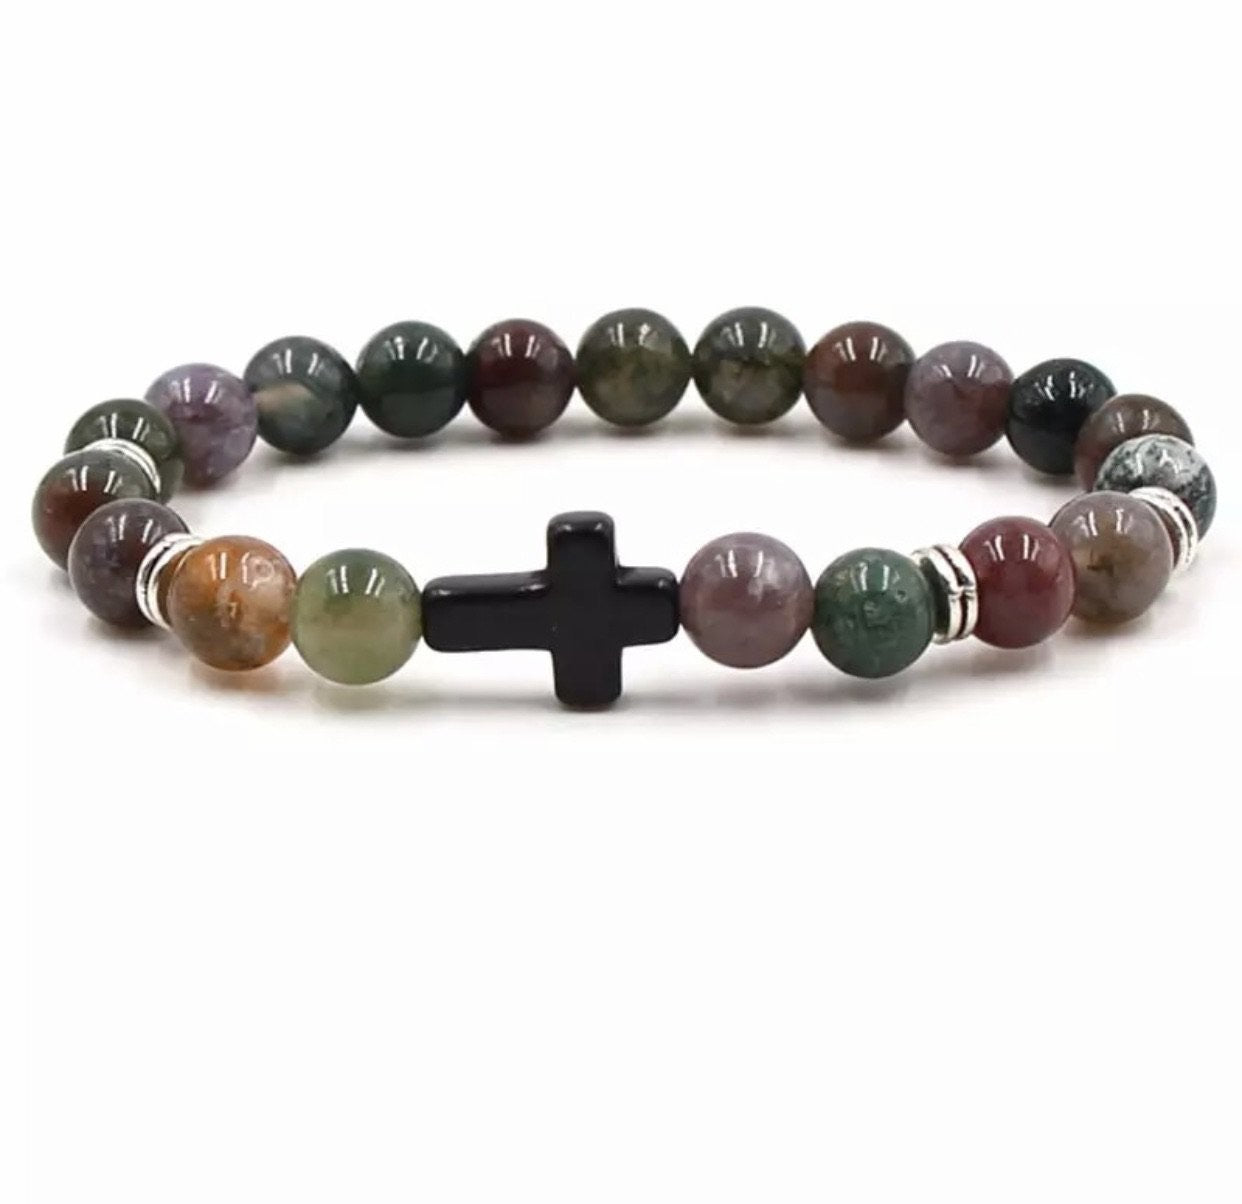 Argent Craft Colored Stones Healing Bracelet With Cross (black)